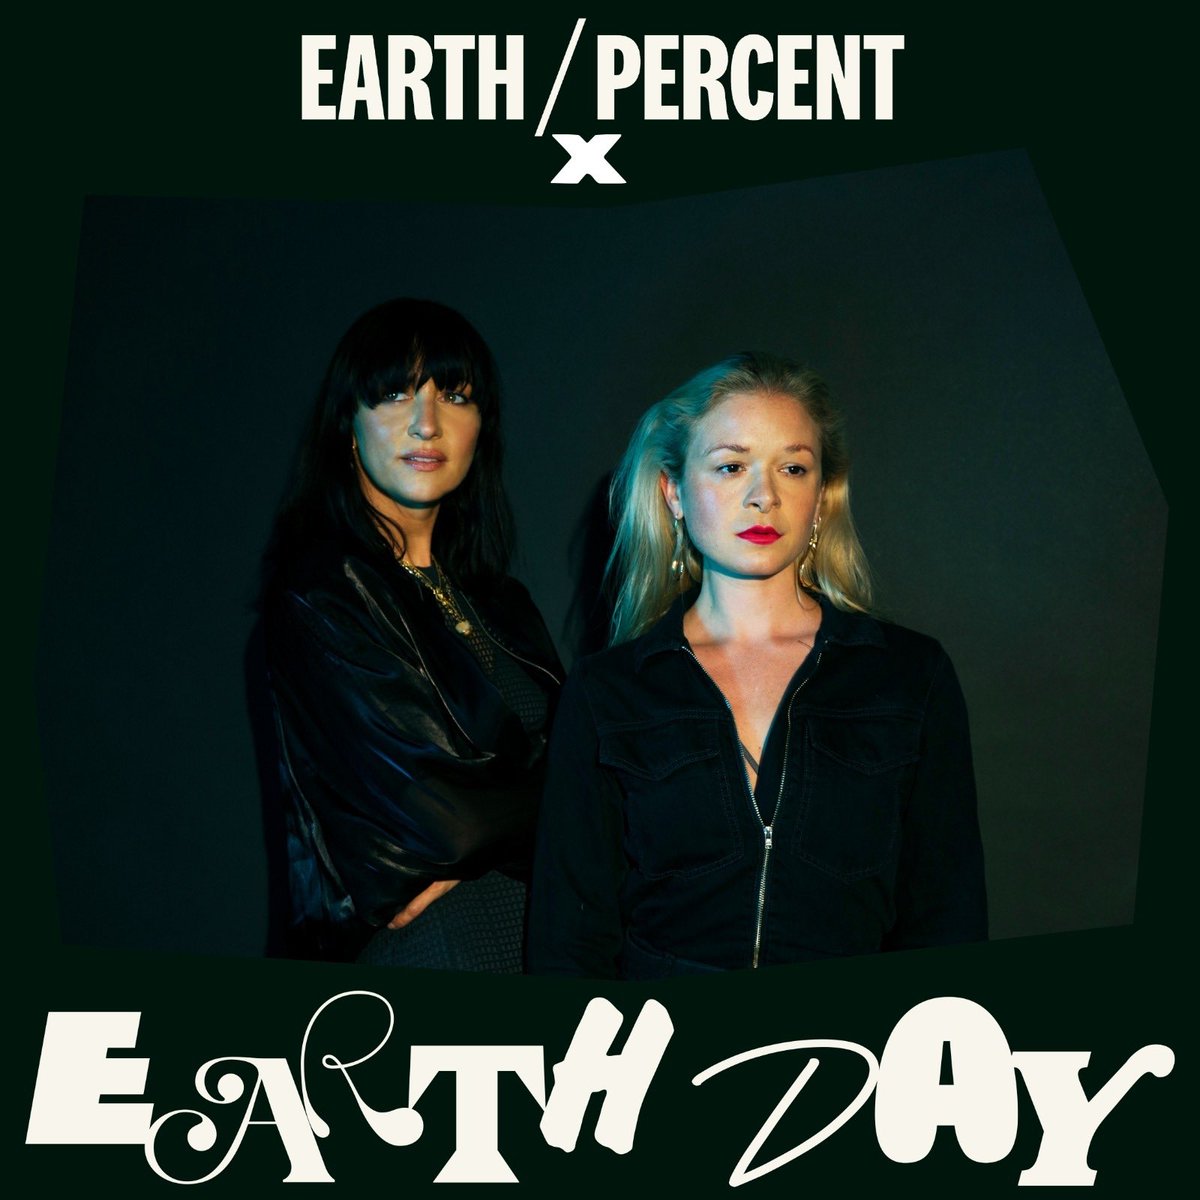 .@earthpercentorg x Earth Day launches today! Delighted to be one of the 100+ artists offering a track to support organisations doing vital work to help tackle the climate emergency. All info earthpercent.bandcamp.com
#EarthPercentEarthDay #NOMUSICONADEADPLANET